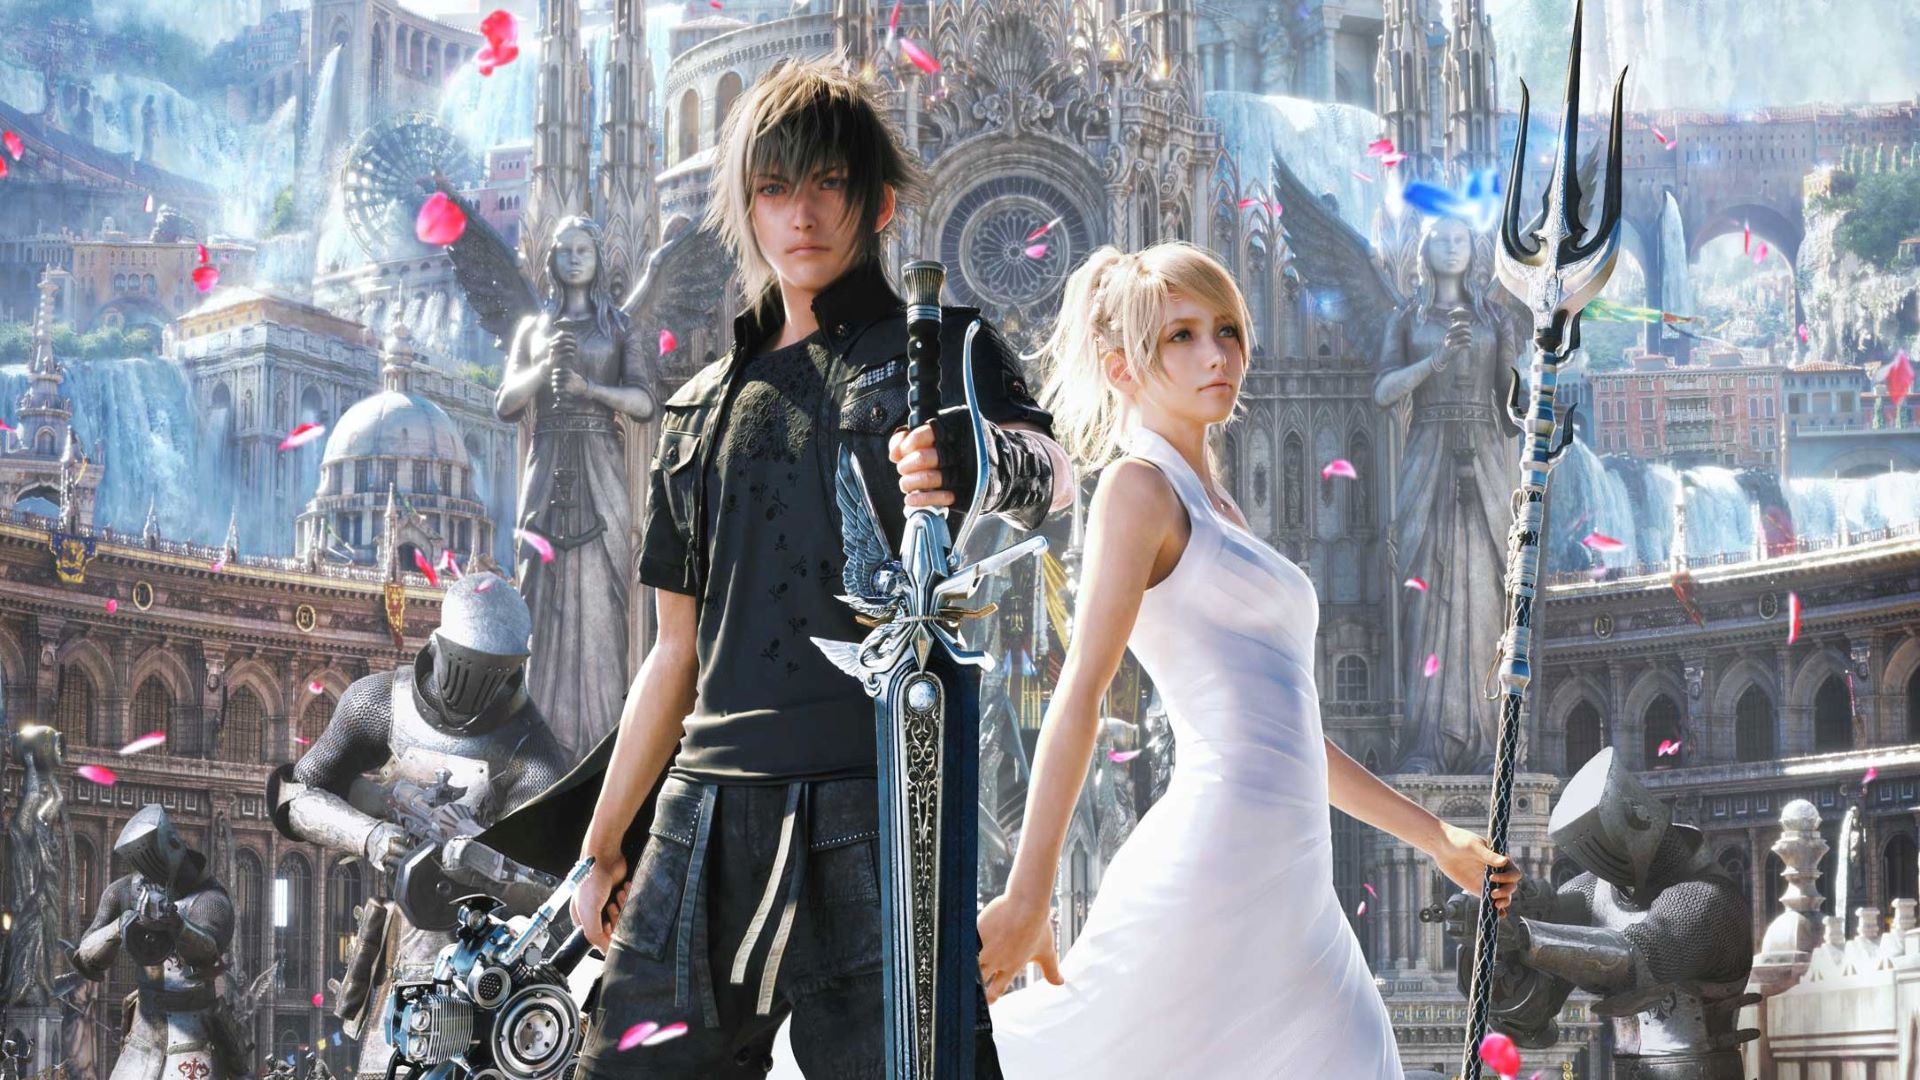 Five years on, Final Fantasy 15 is officially a sales success as it crosses 10 million copies sold